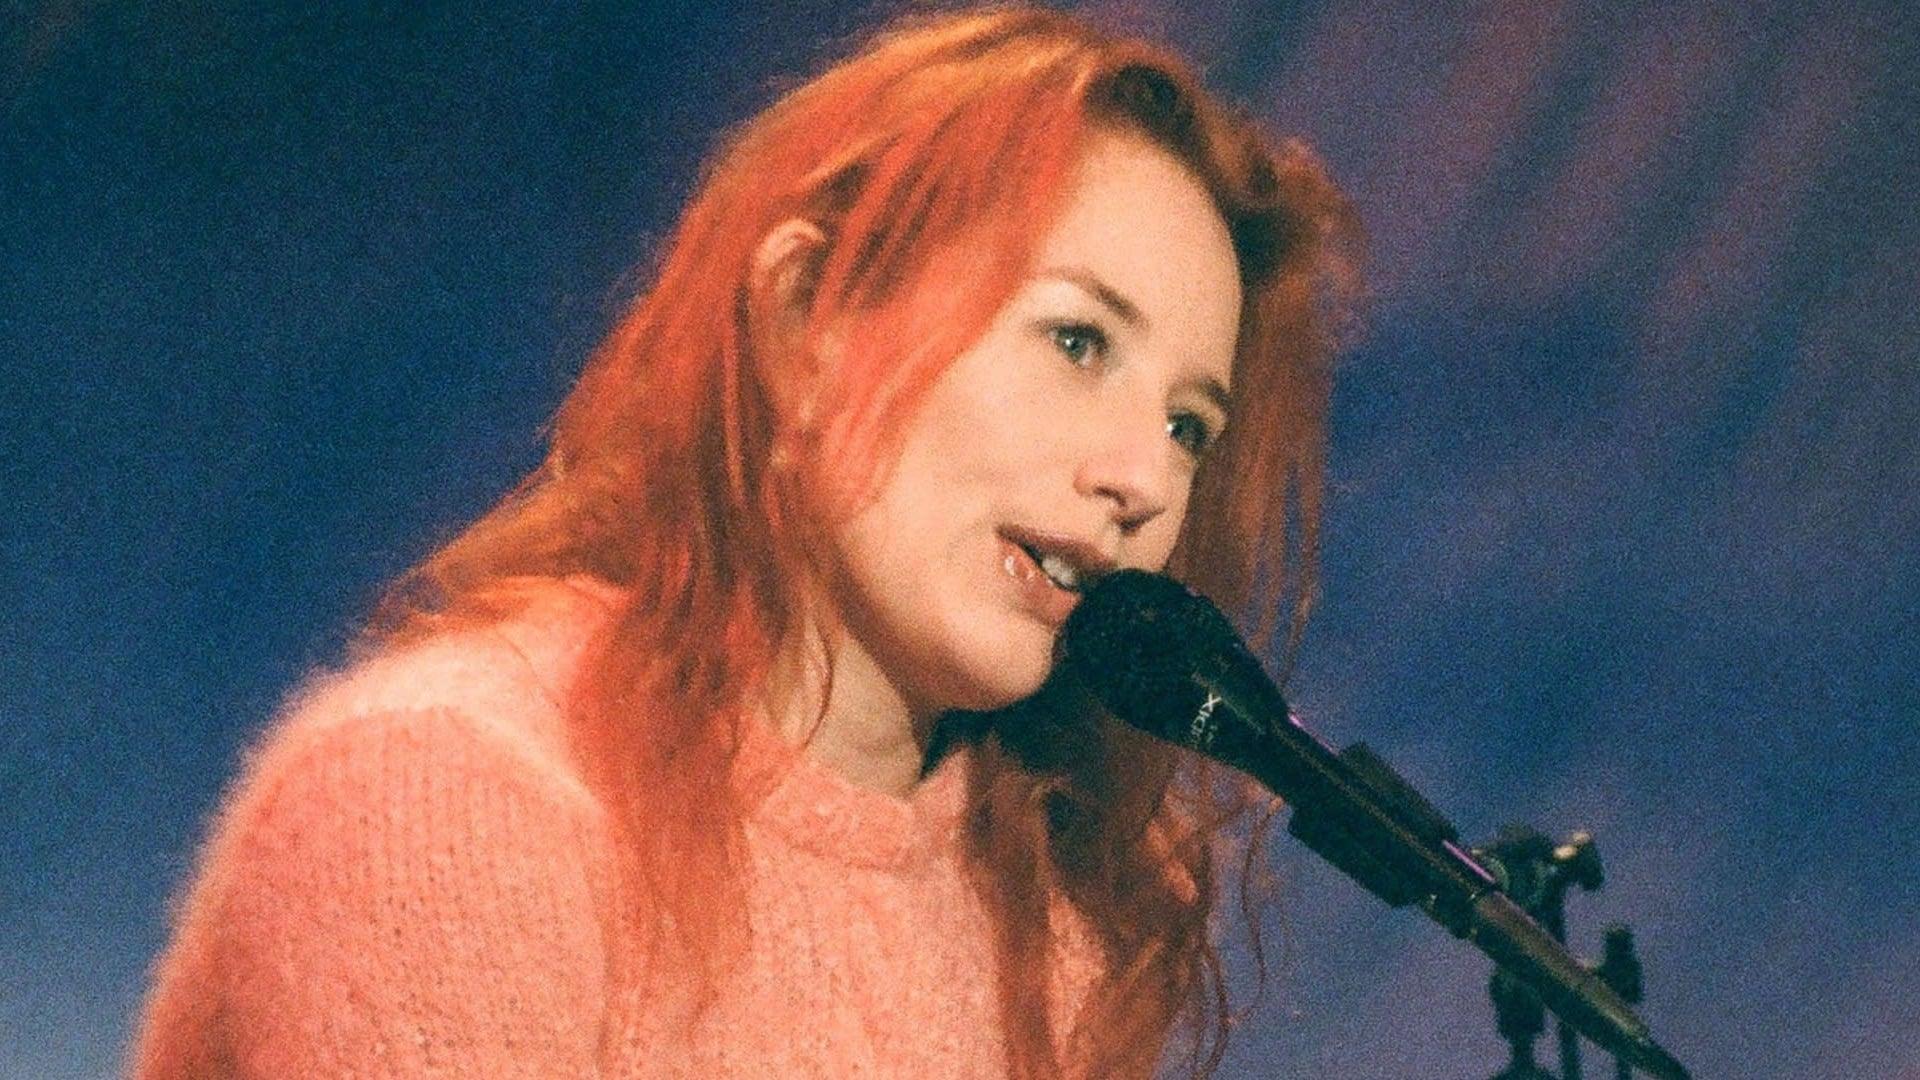 Tori Amos: Live from New York backdrop